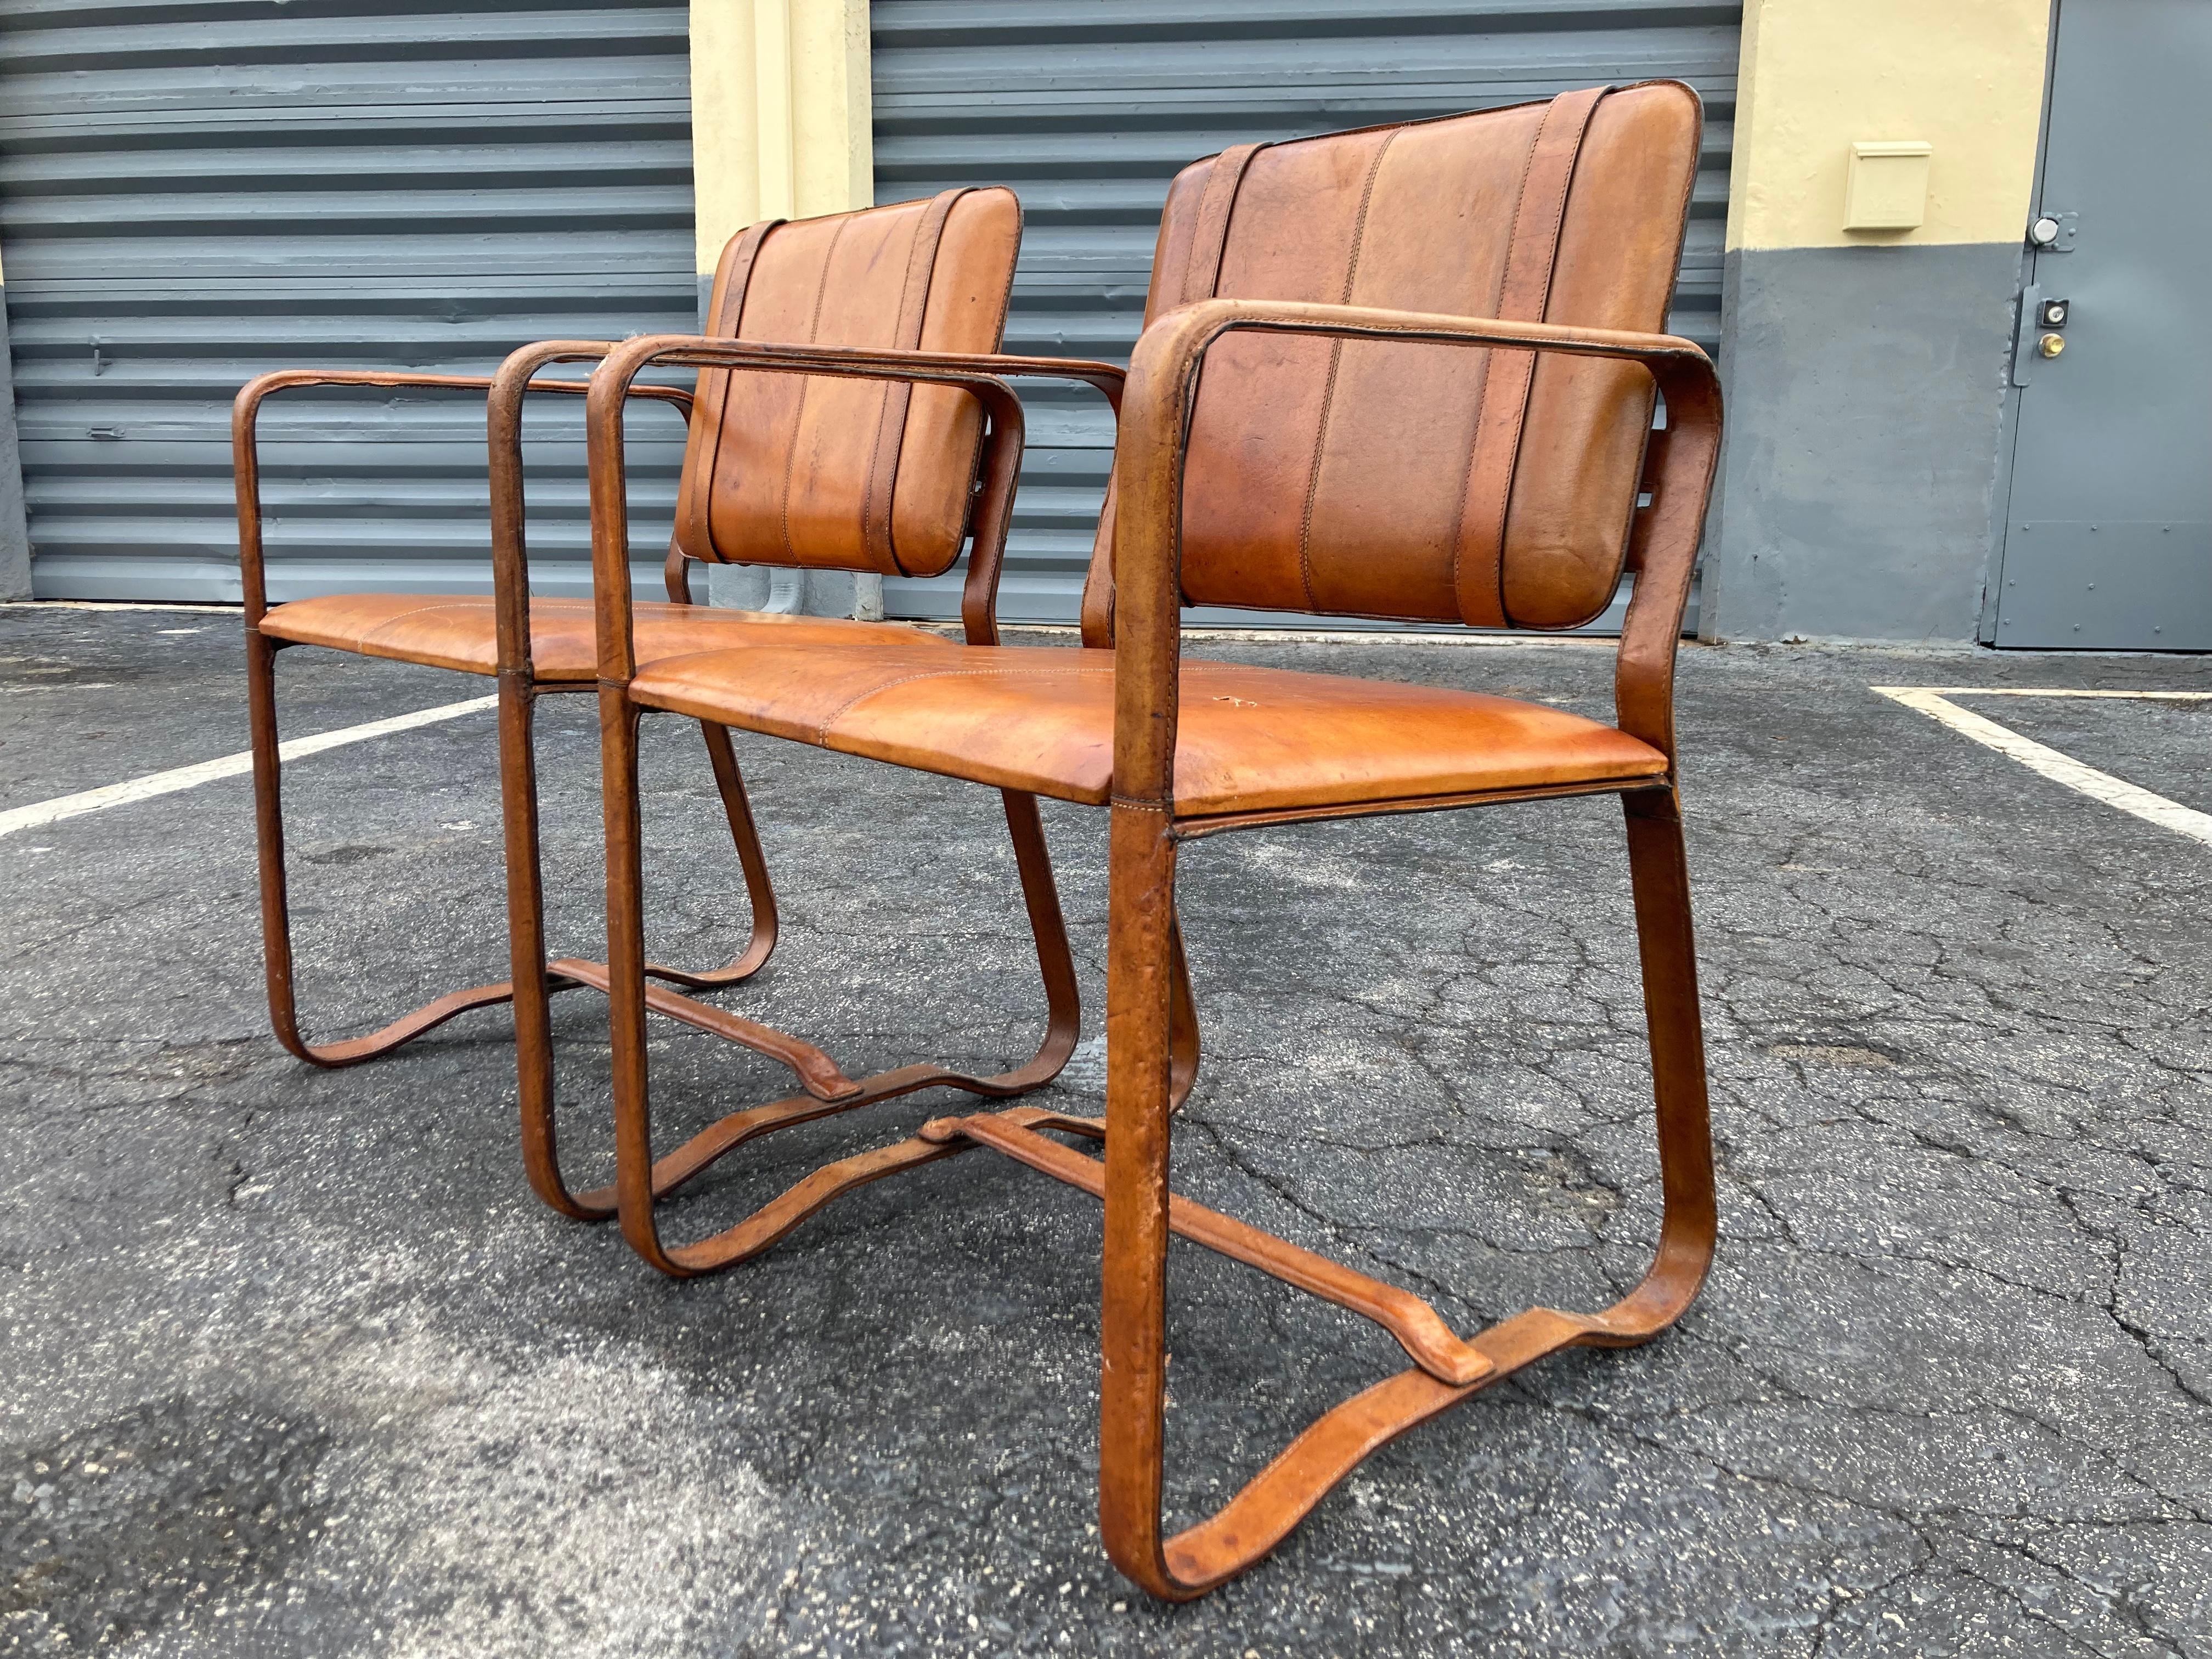 Modern Pair of Cognac Leather Wrapped Arm Chairs in the style of Jacques Adnet